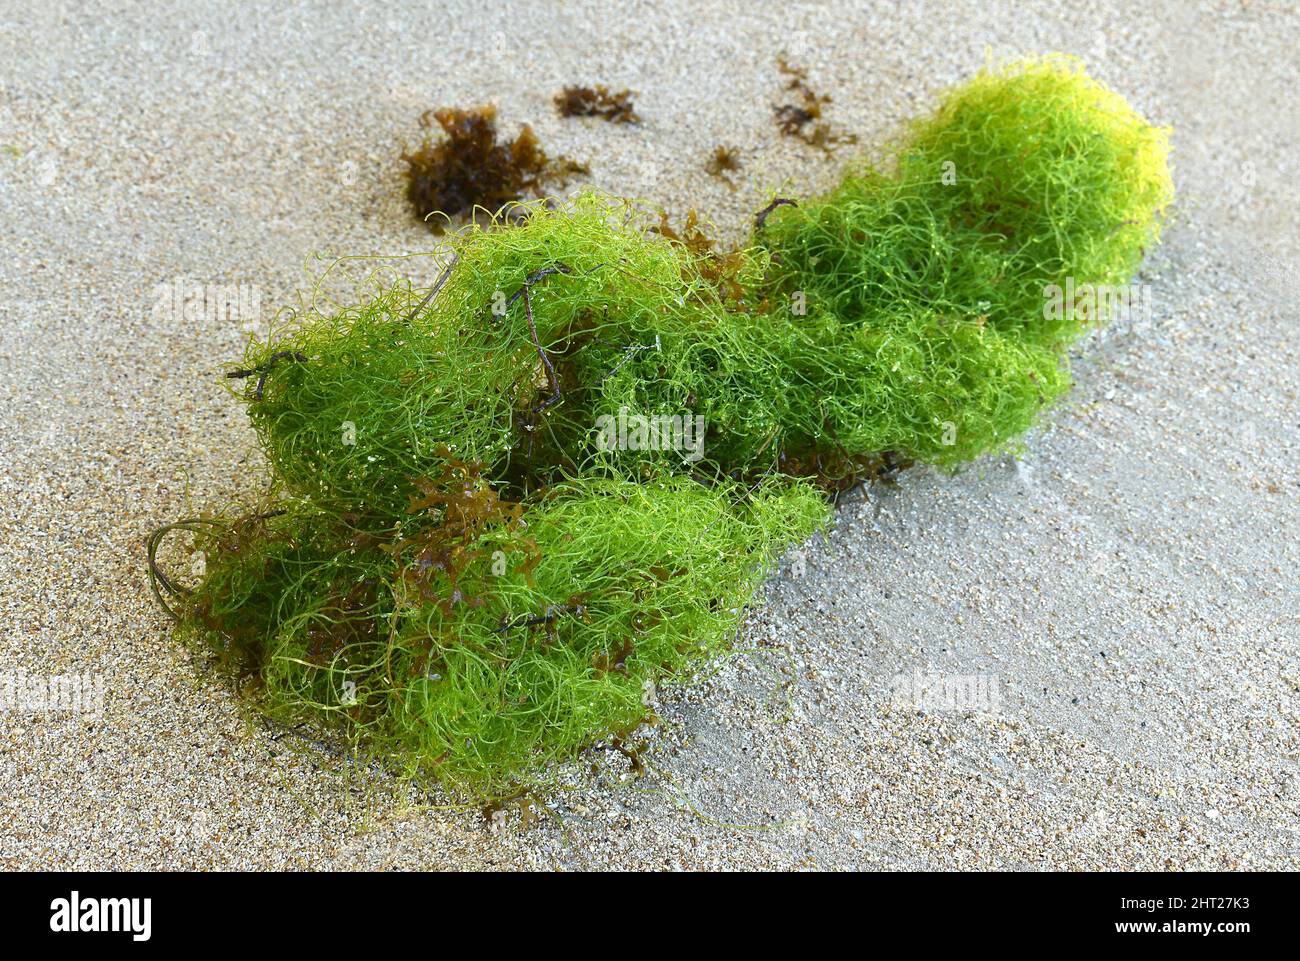 A species of algae, the Latin name Chaetomorpha, a beautiful green structure composed of fine fibers laid on sand. Stock Photo